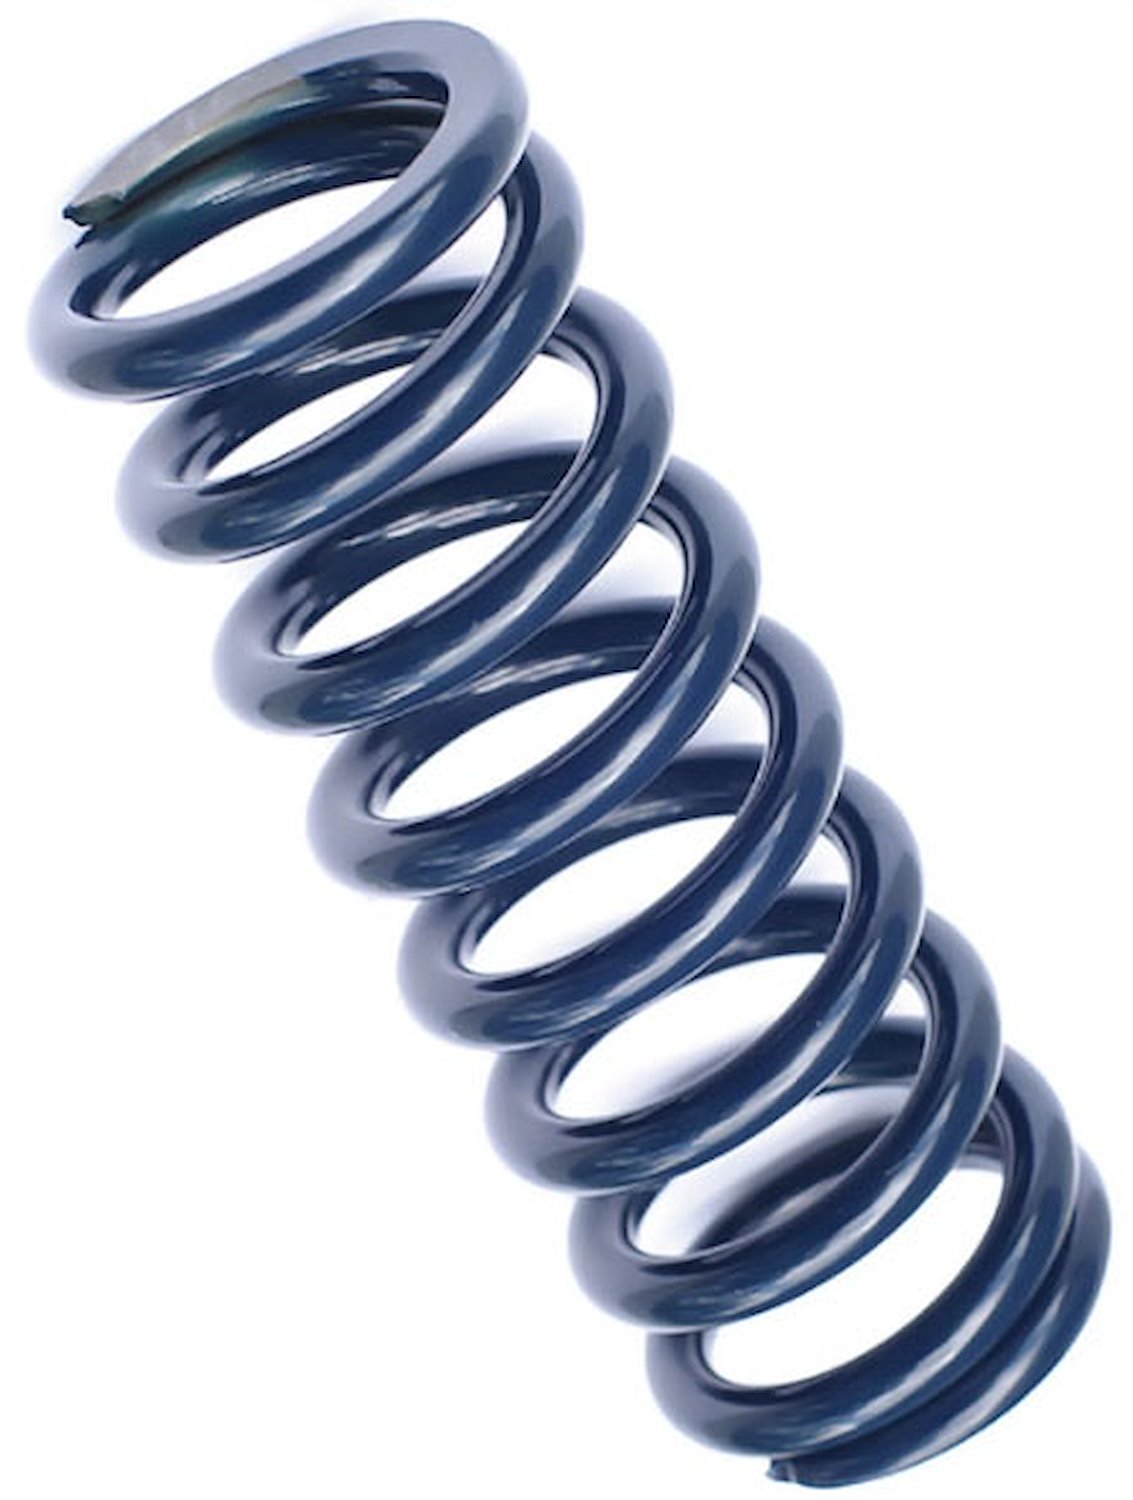 Coil-Over Spring 500 lb. Spring Rate [14 in. Free Length]